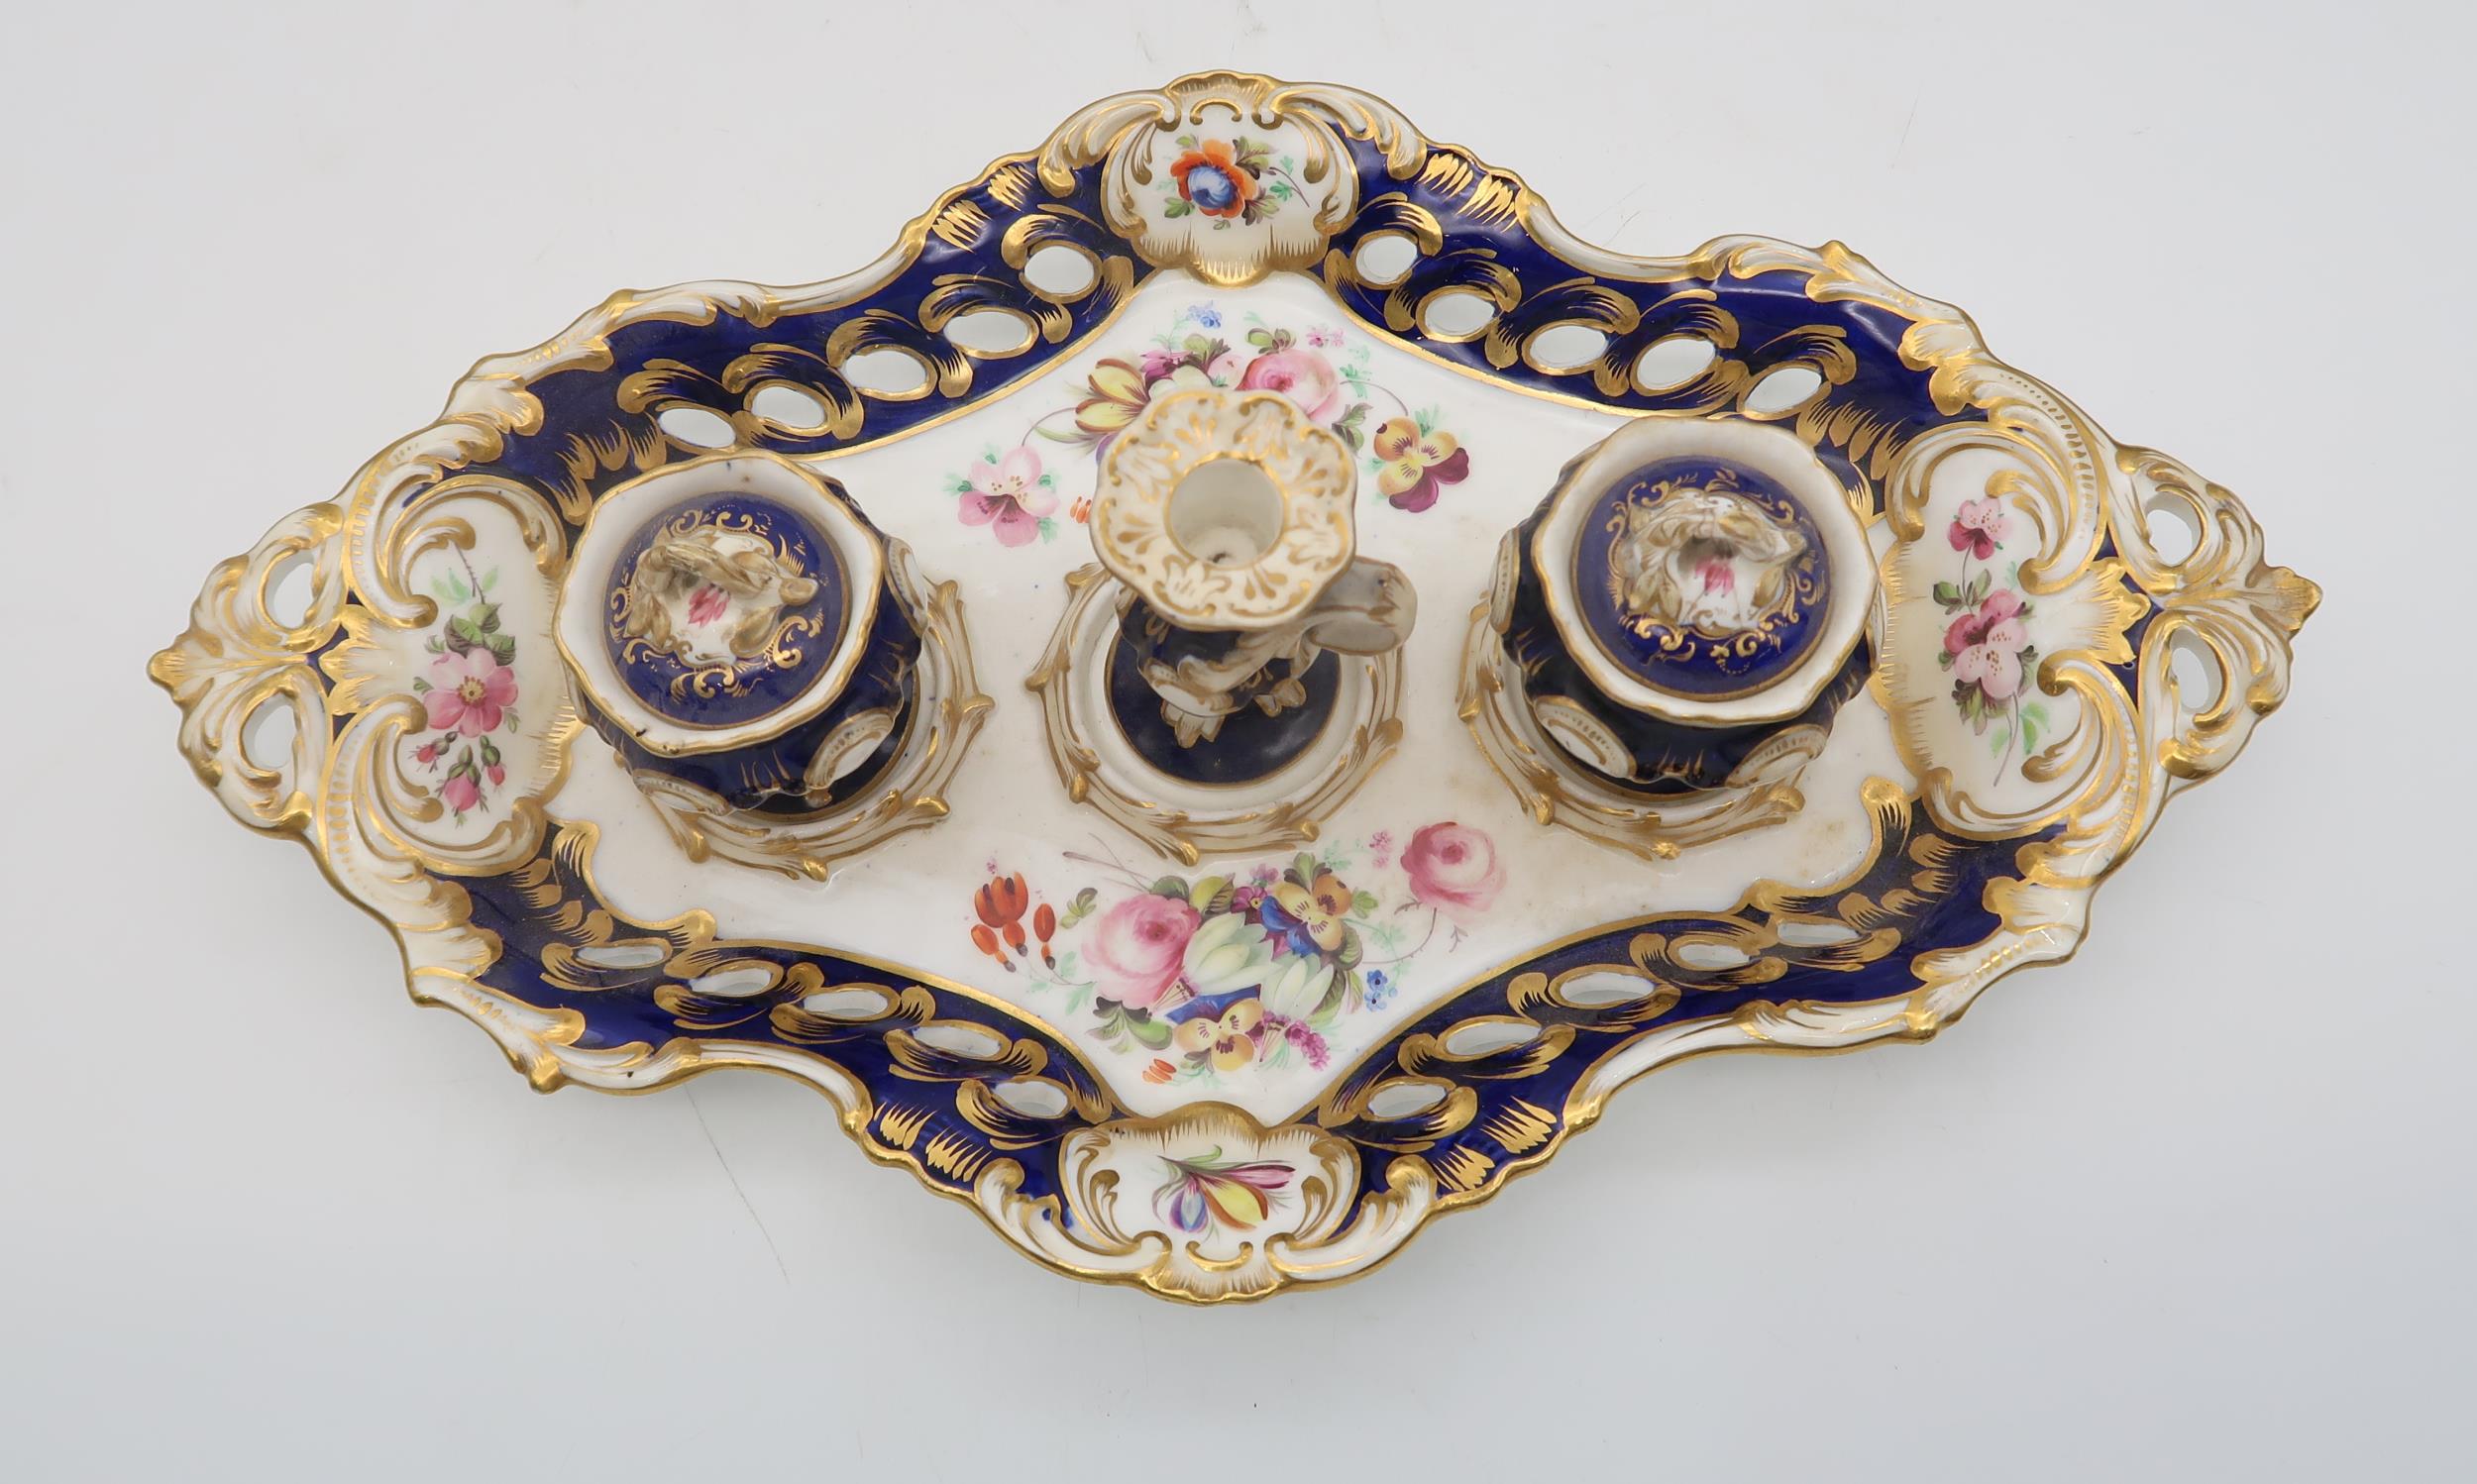 A 19th century ceramic desk set painted with flowers and gilt decoration, Royal Copenhagen - Image 2 of 3